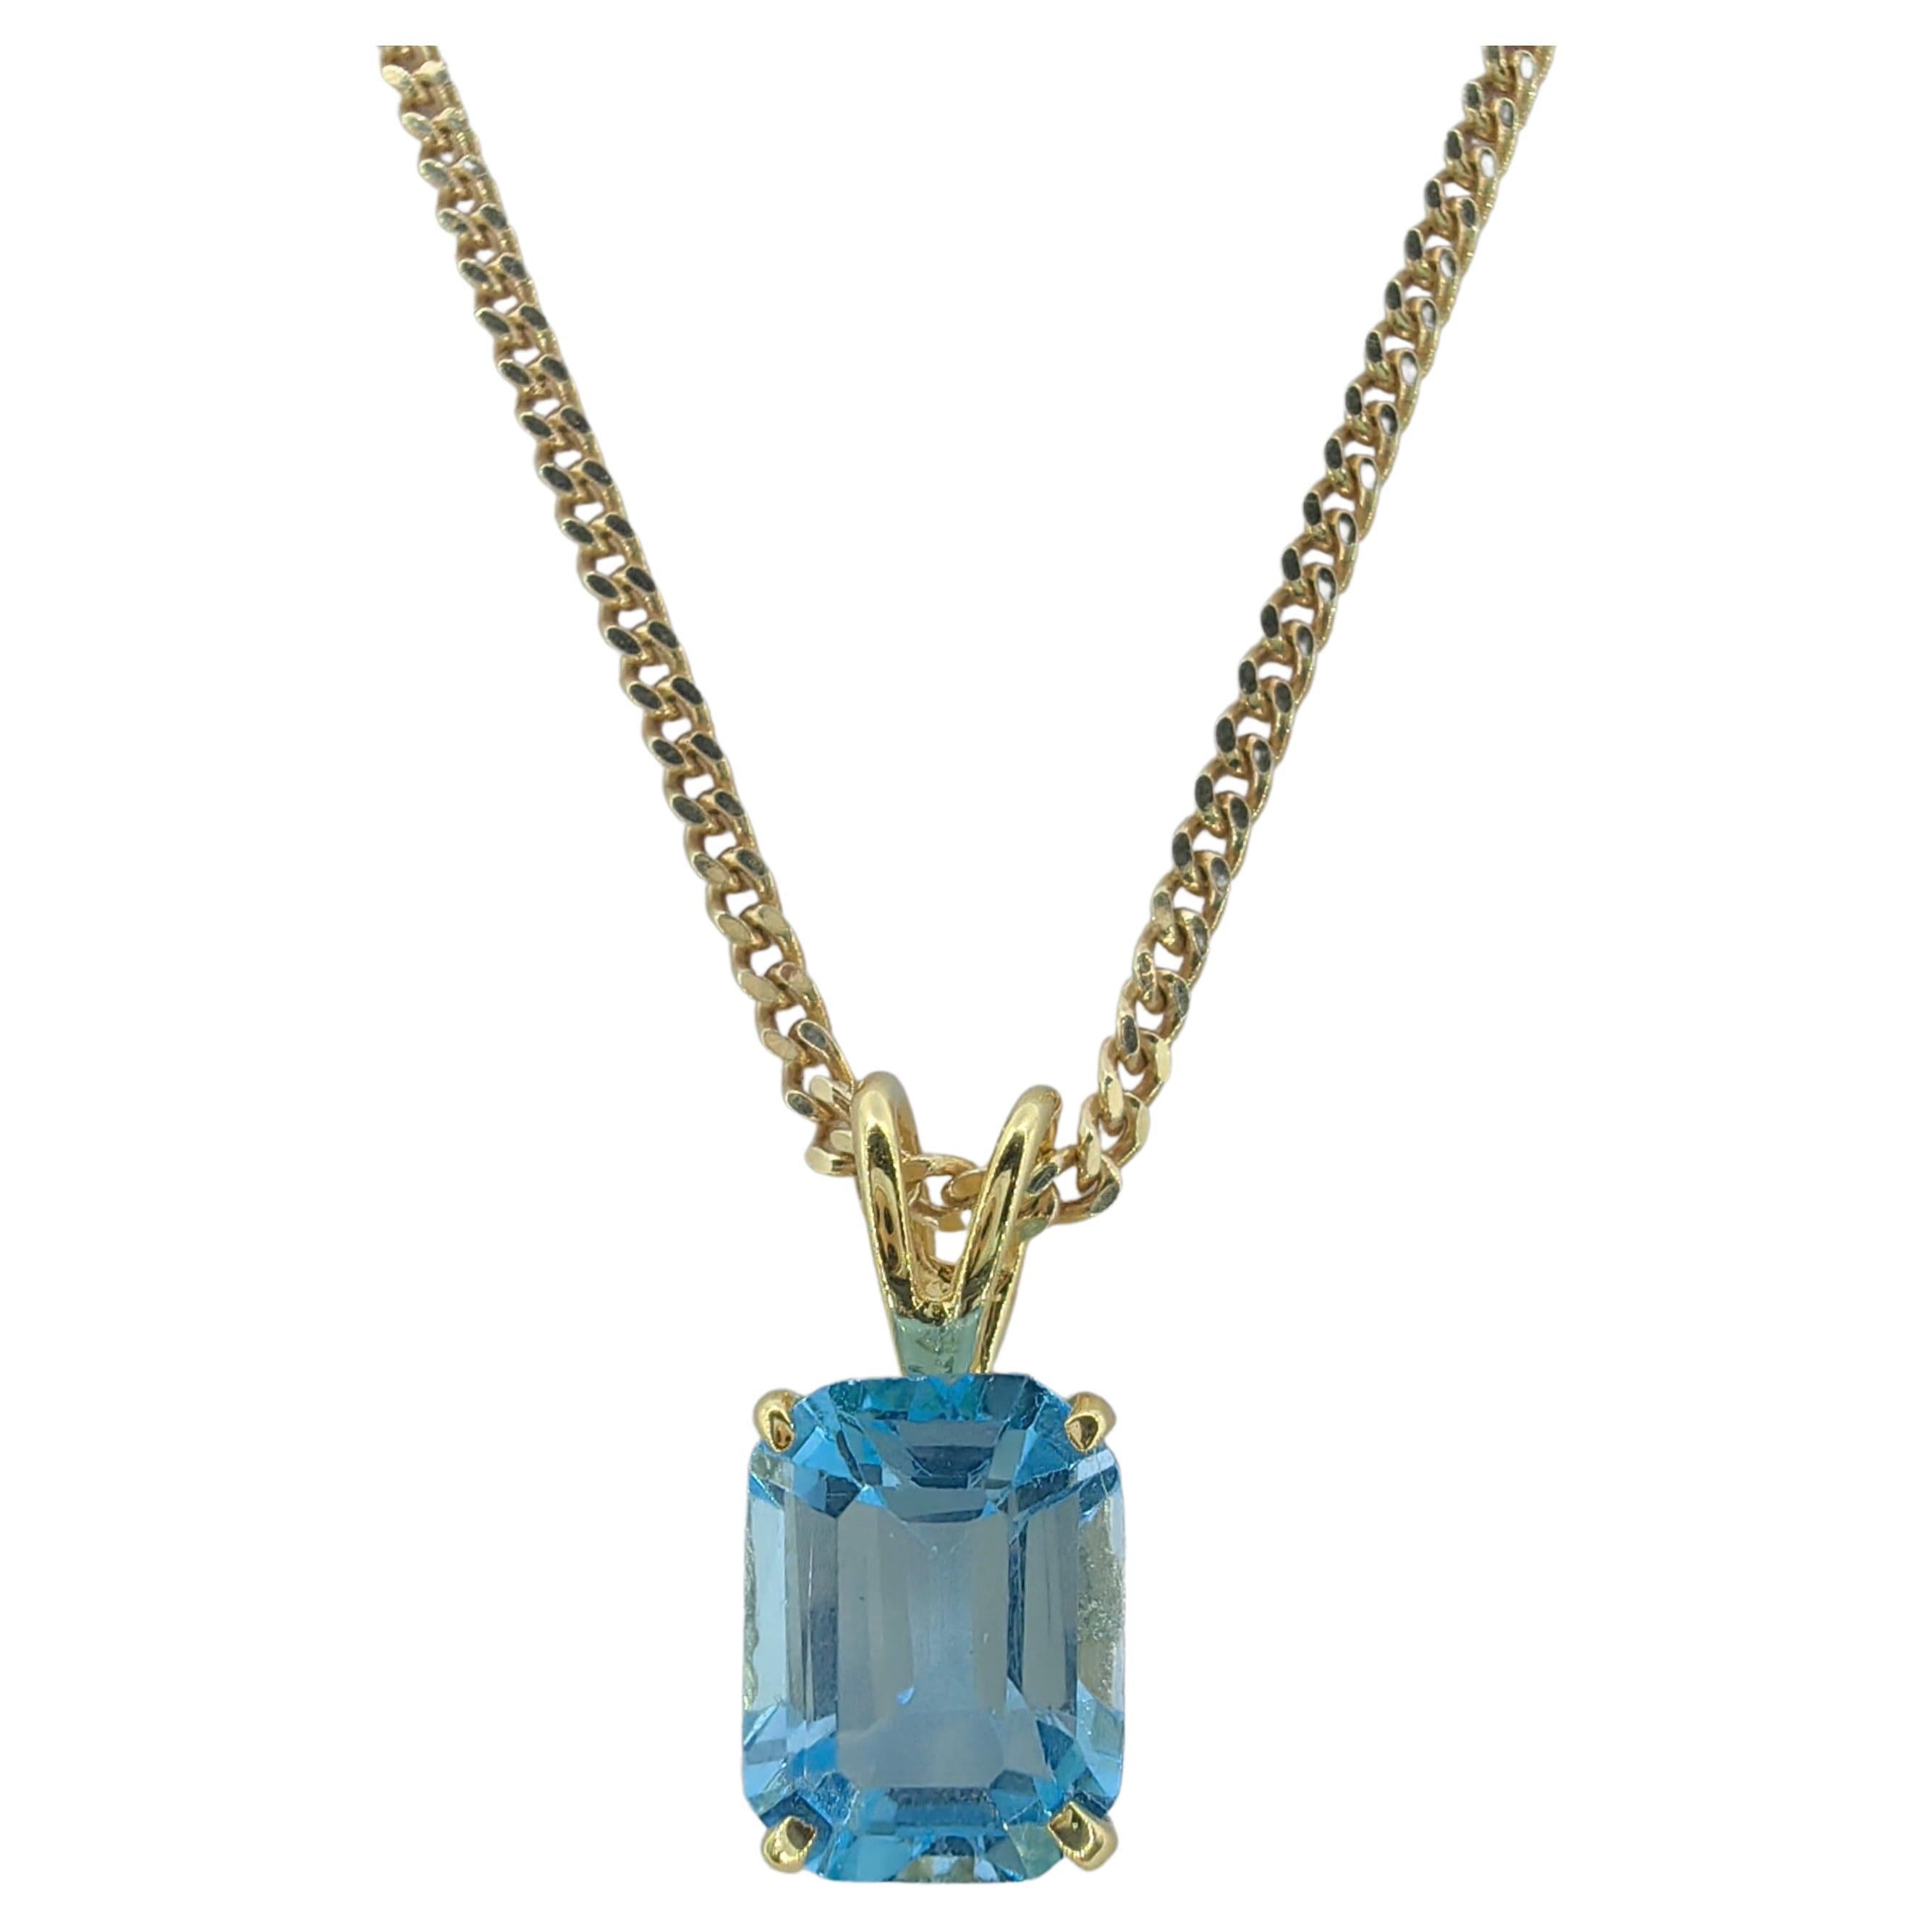 Vintage 1980's Emerald Cut Blue Topaz Necklace Pendant in 14K Yellow Gold #1